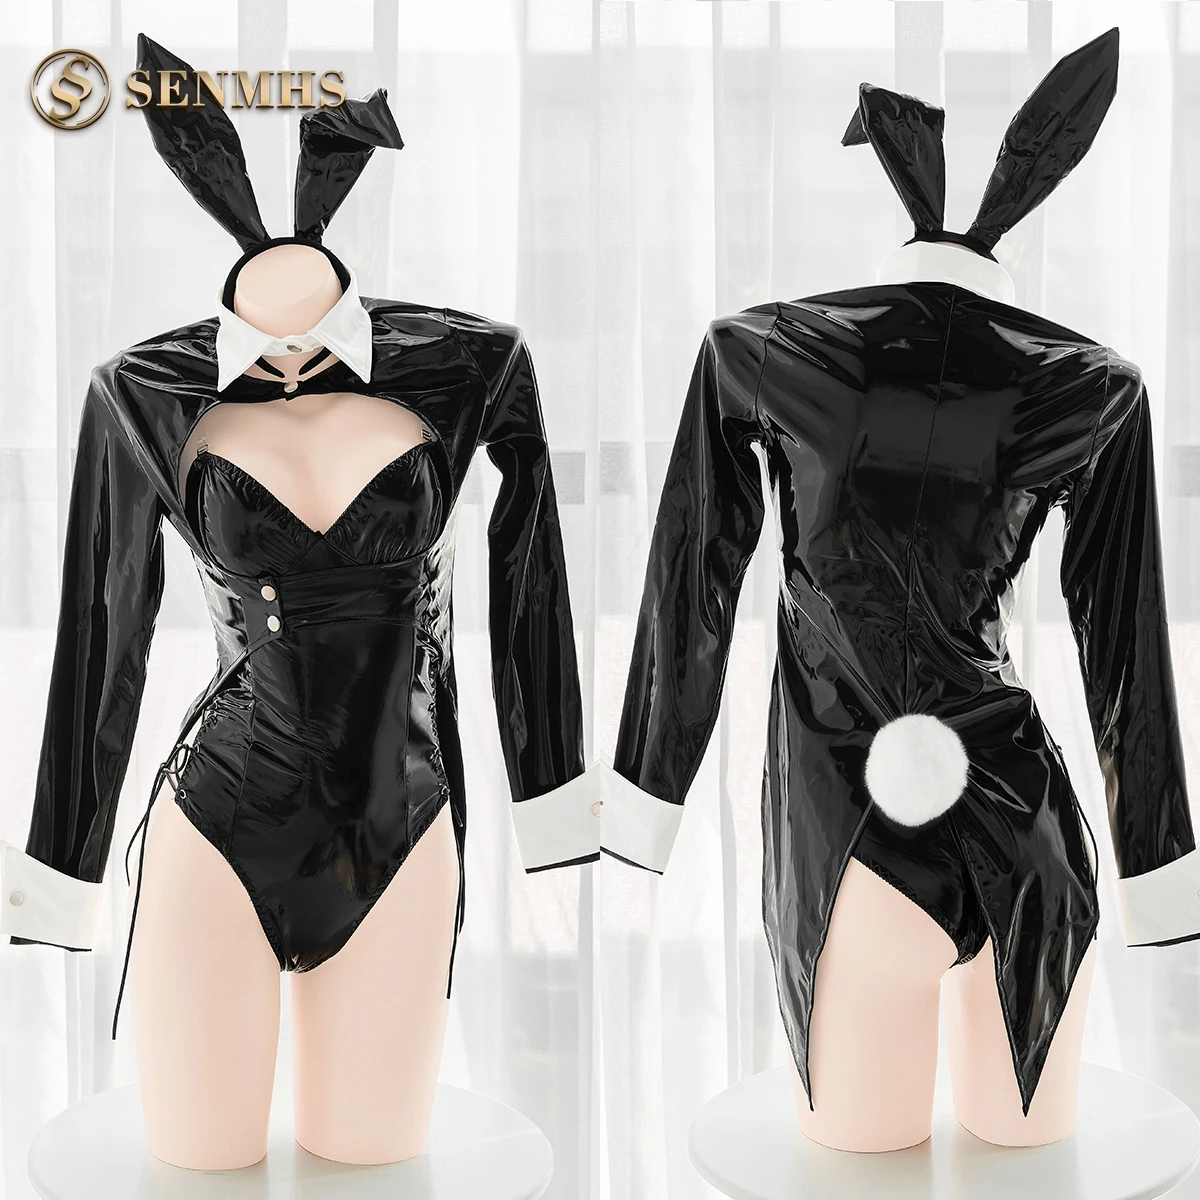 

SENMHS Women Bunny Cosplay Costumes Hollow Out Full Body Harness Leather Lingerie Halter Neck Bondage Erotic Bodysuit Two Piece